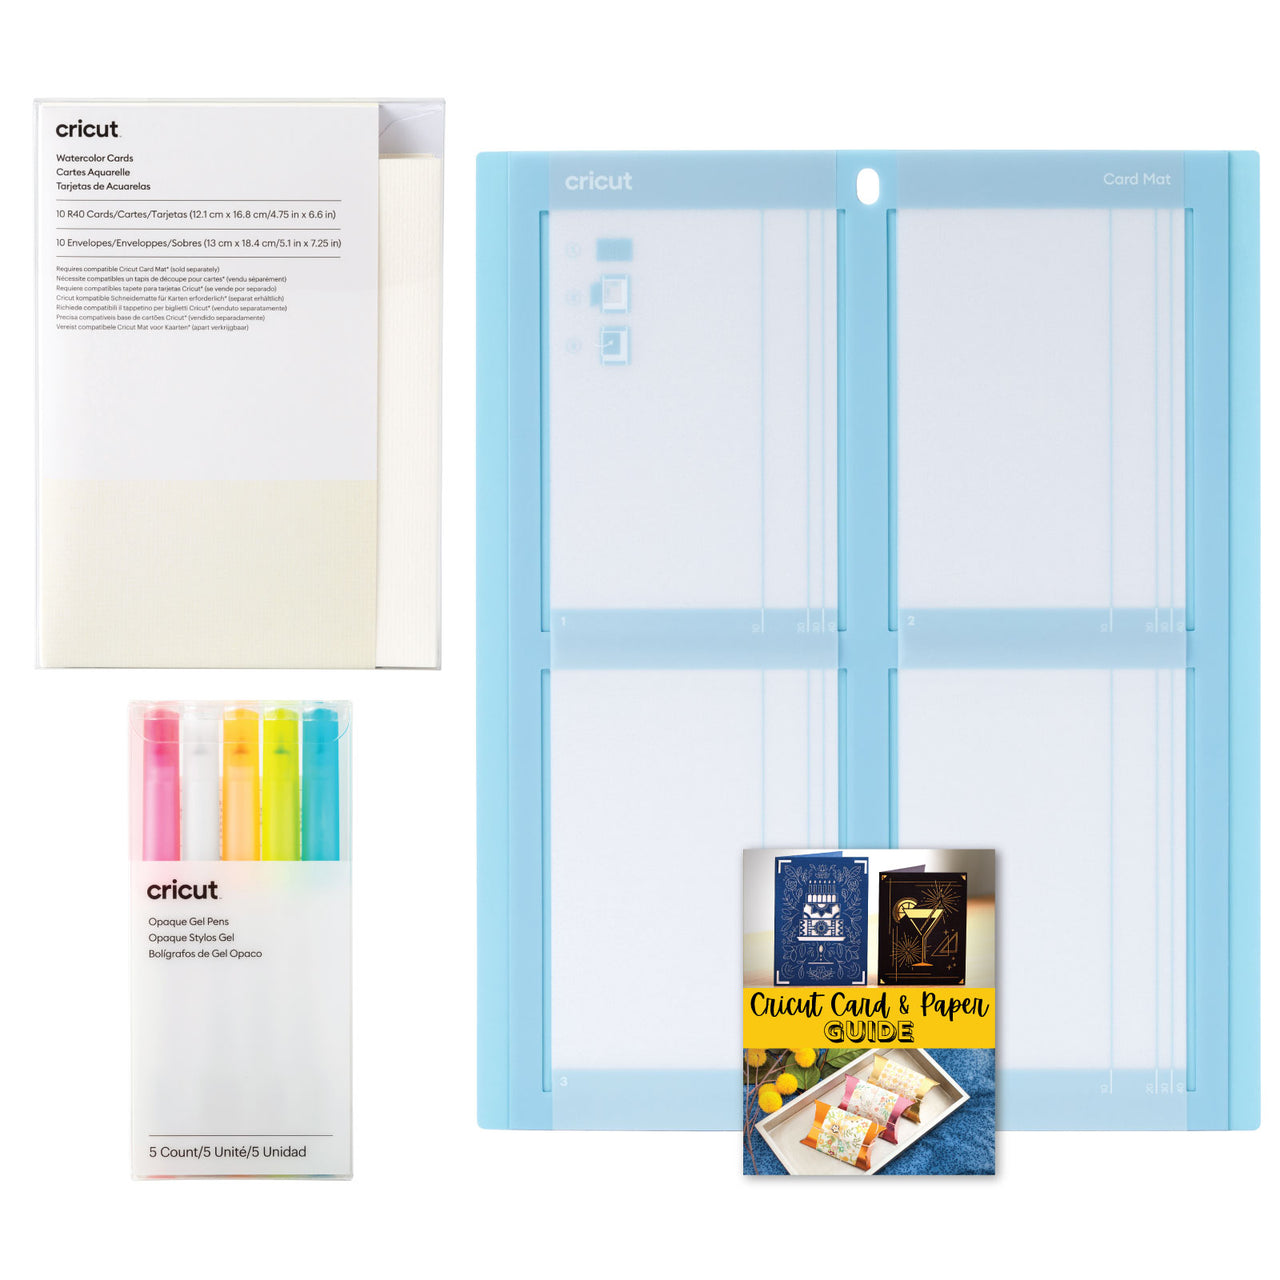 Cricut R40 Watercolor Cards with Rainbow Watercolor Markers and 2x2 Card Mat Bundle